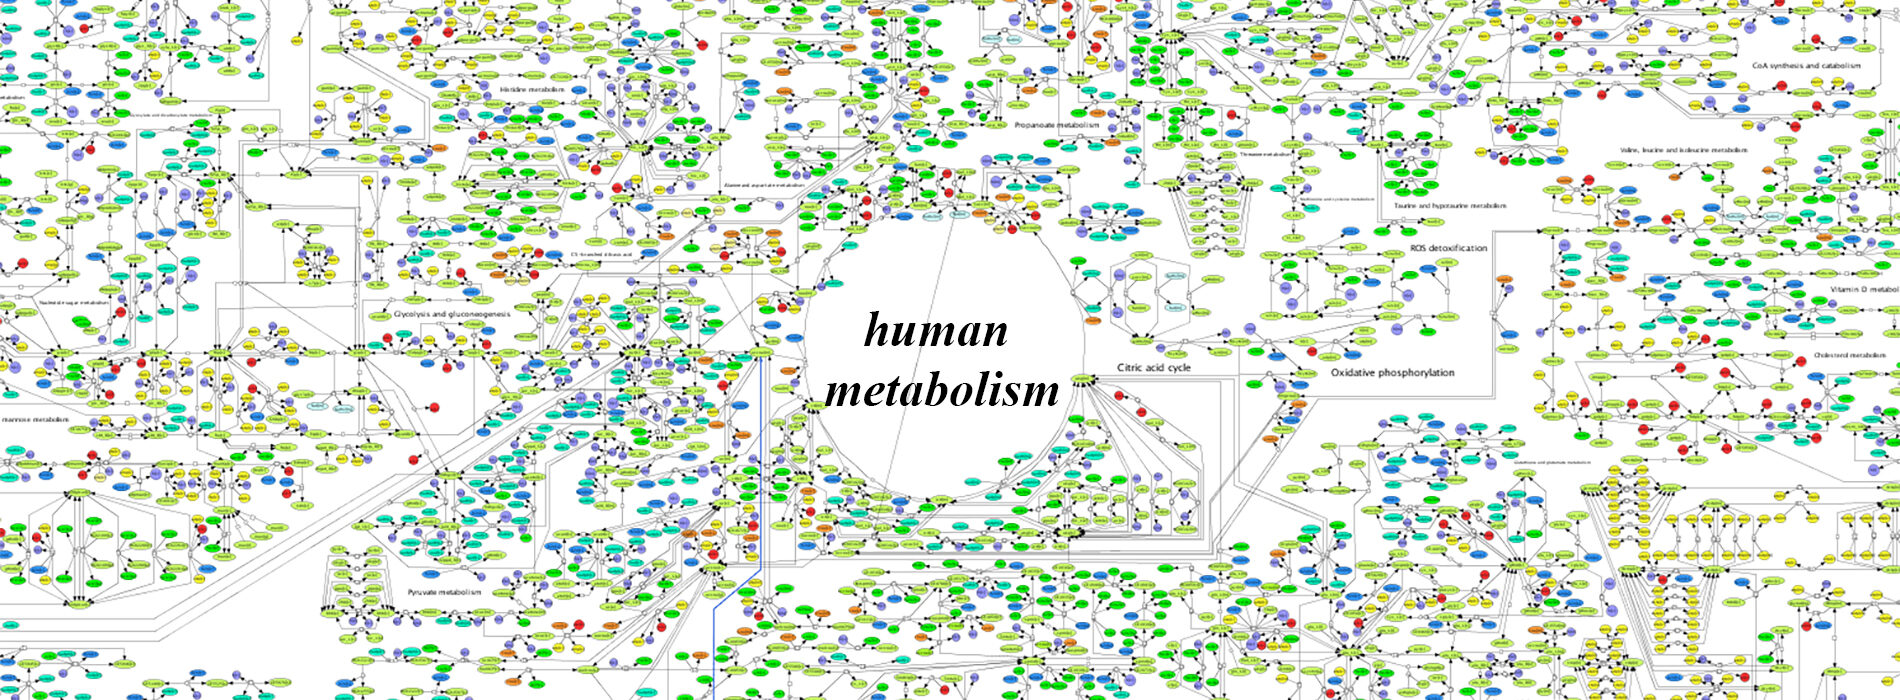 Human metabolism. Menopause changes the balance in our systems and must be reflected by new eating ias we lose weight.